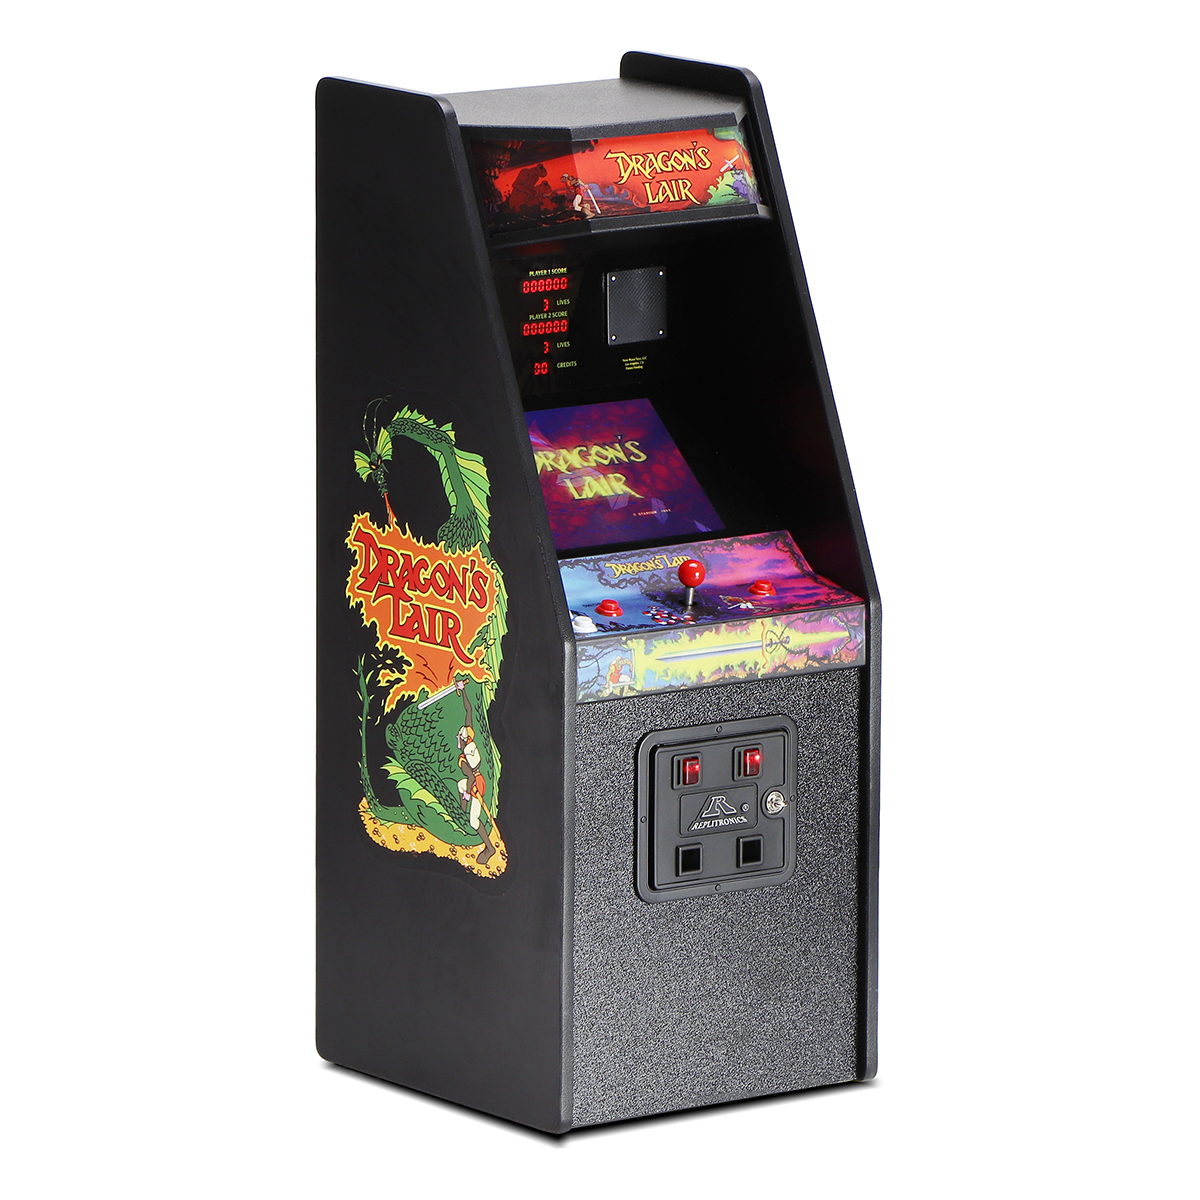 Ghosts 'N Goblins New Wave Toys Replicade 1/6th Scale Arcade